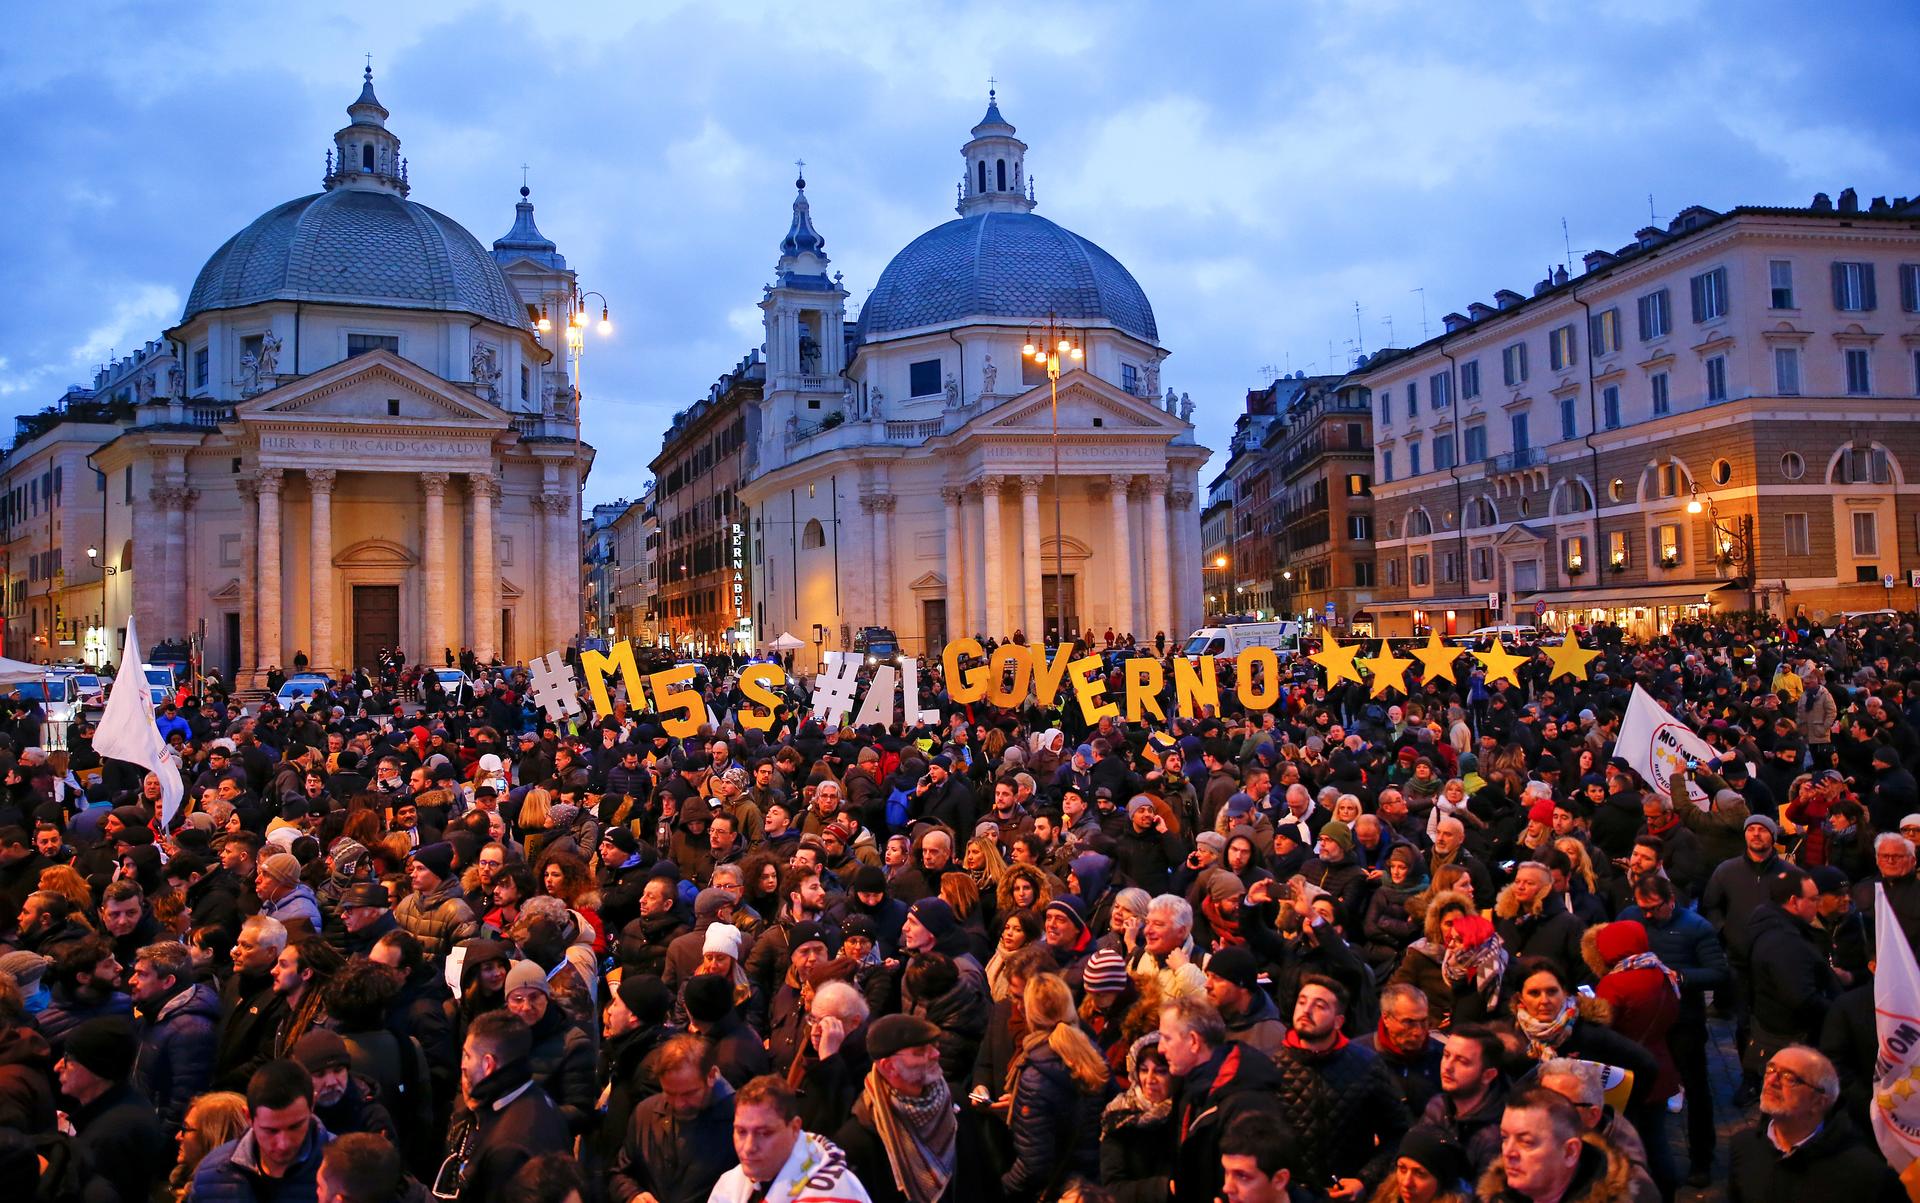 5-Star party supporters gather in Piazza del Popolo